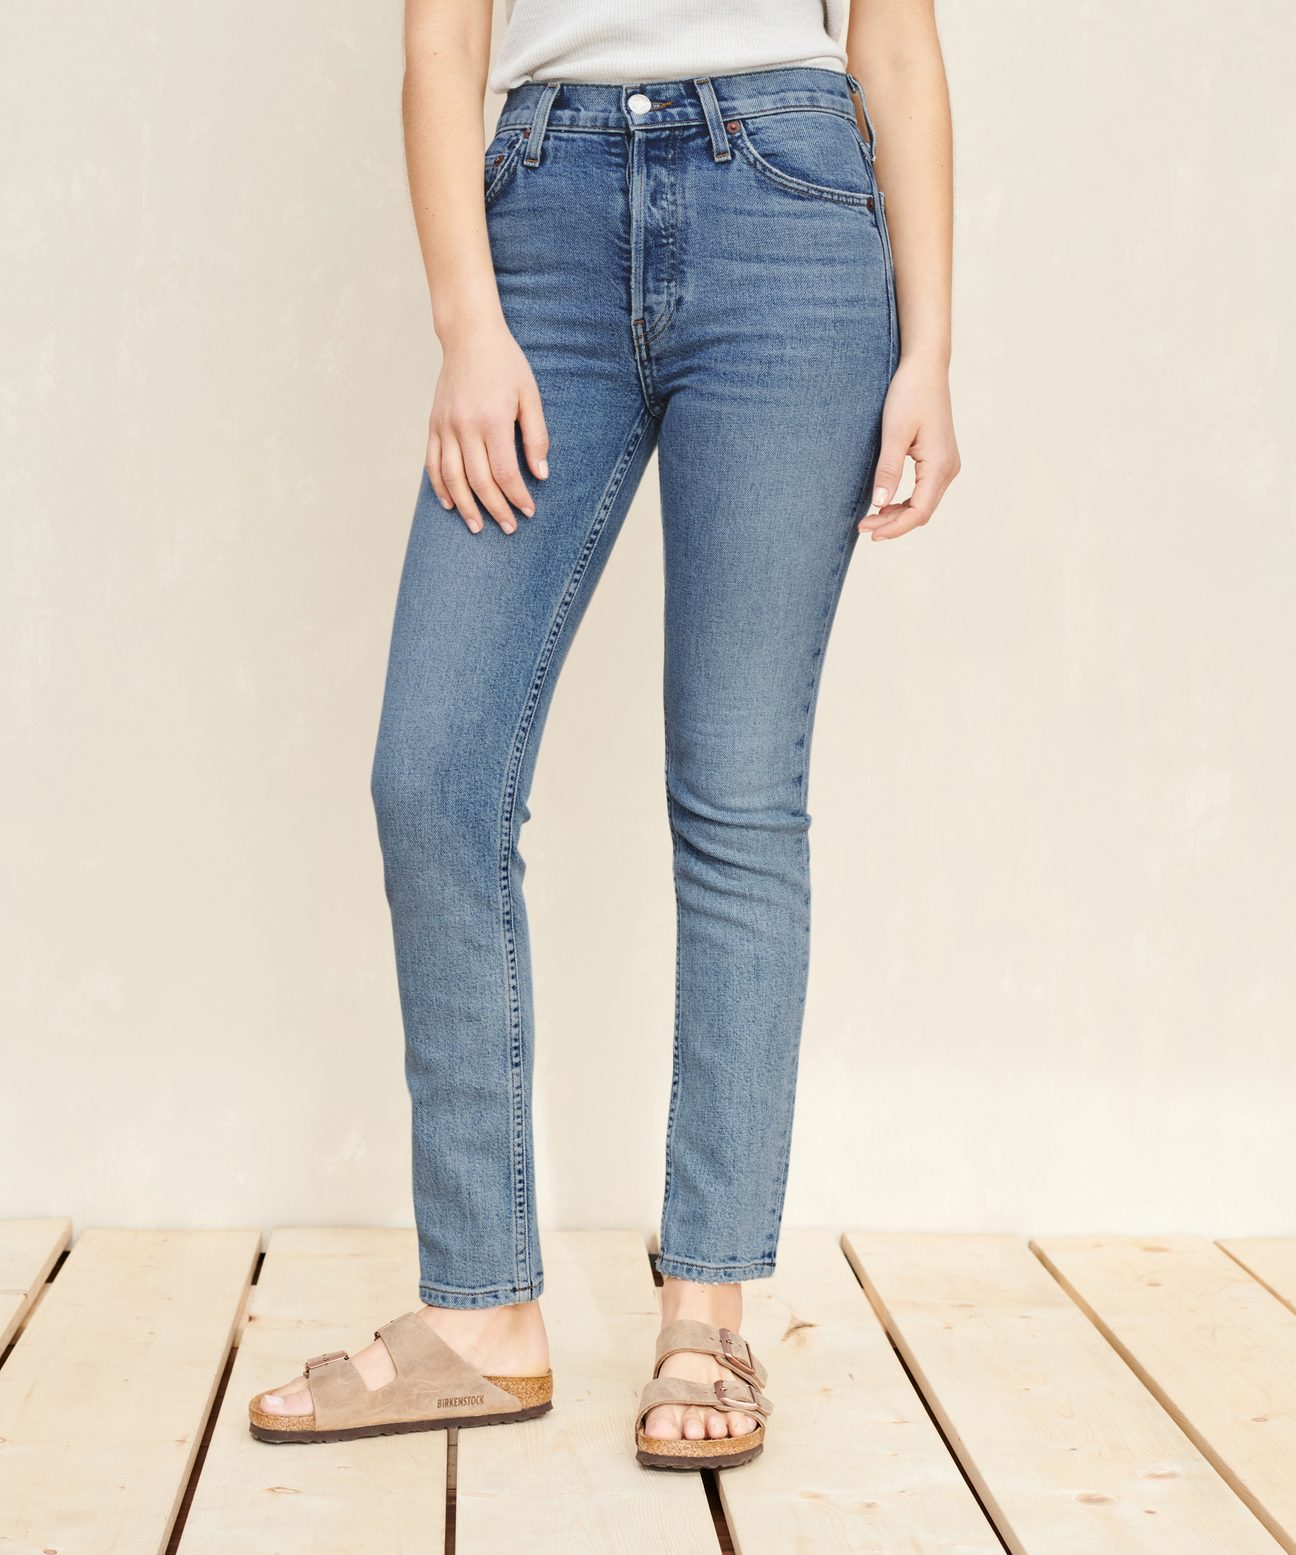 redone cropped jeans